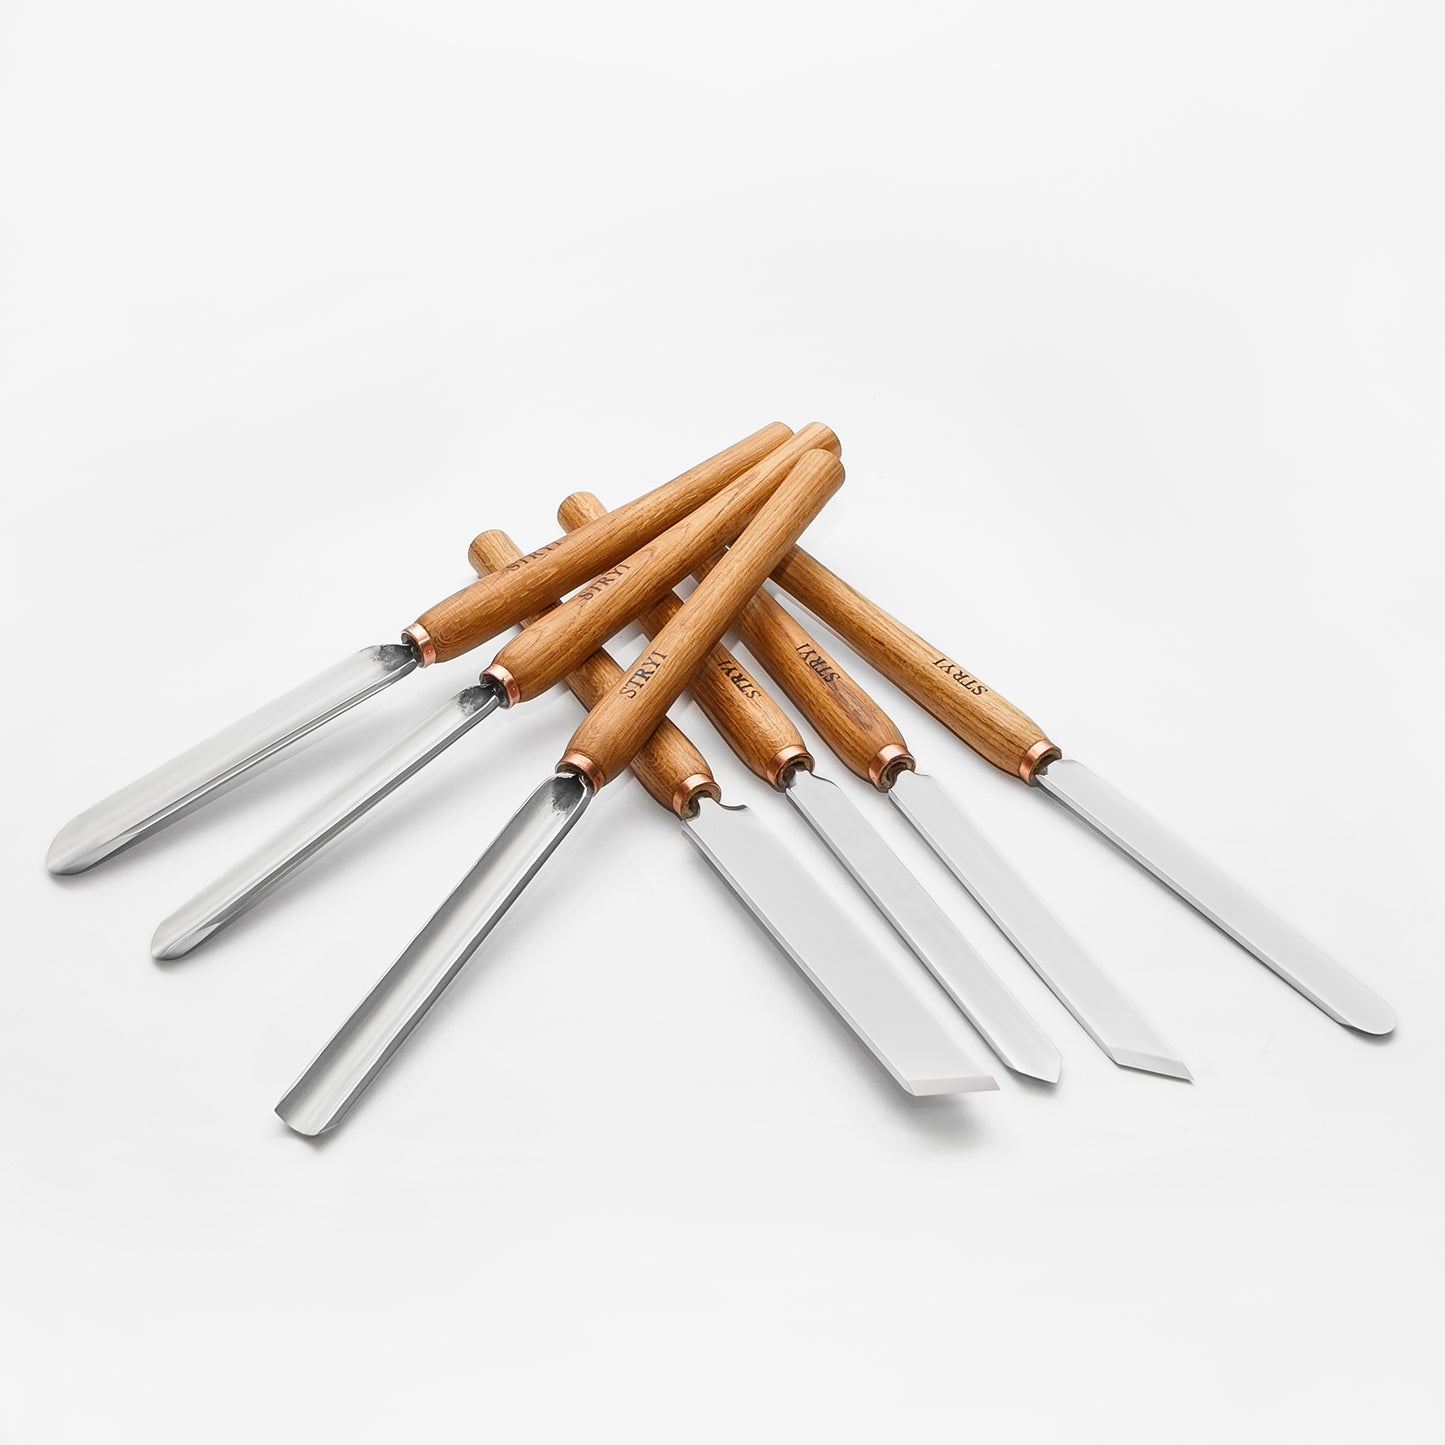 Wood carving set of 7 Wood turning tools STRYI Profi in roll-case